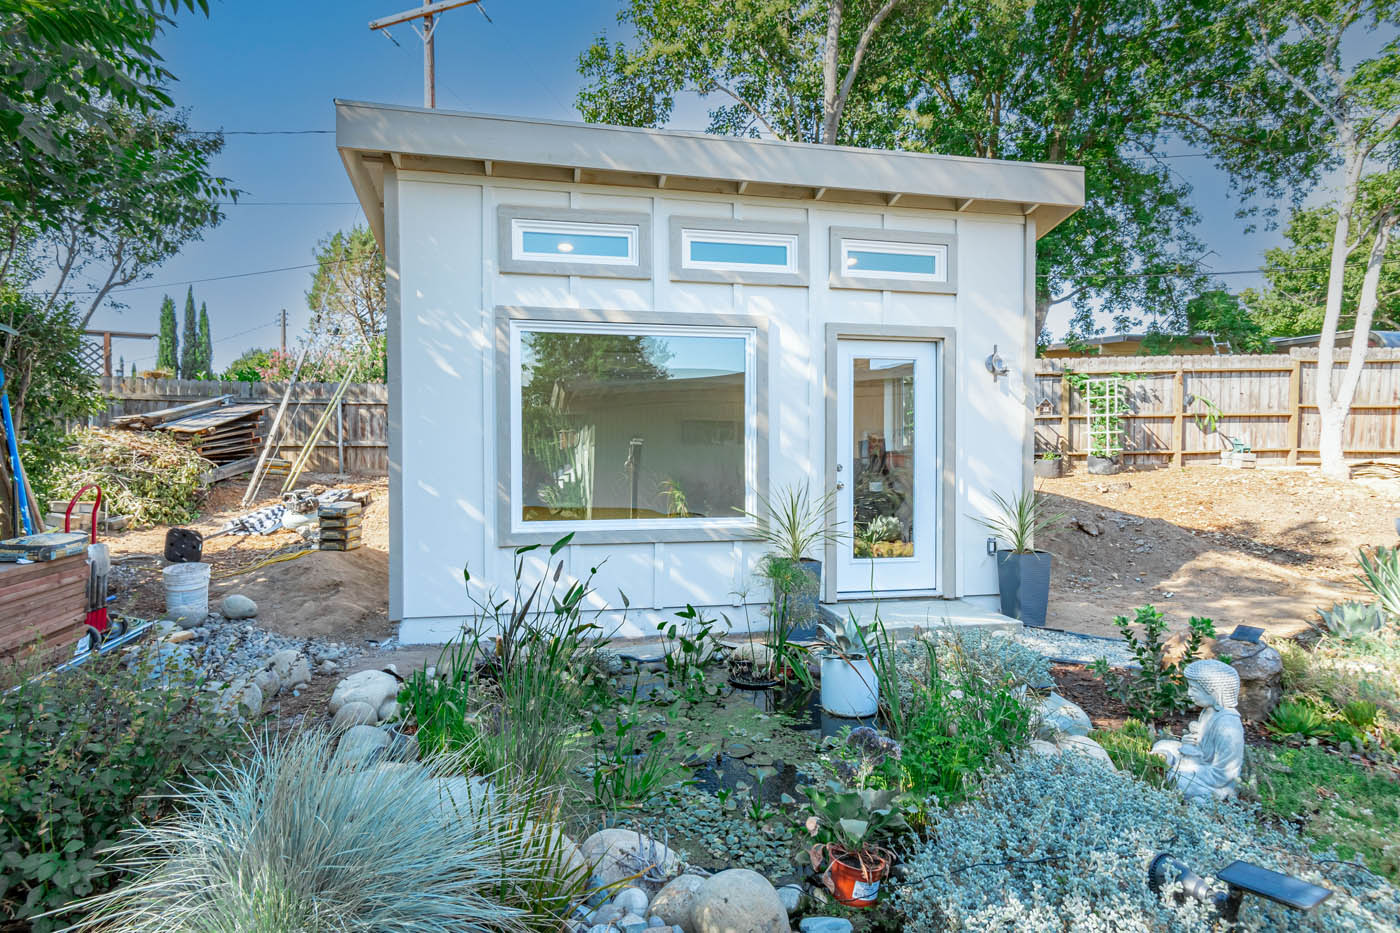 A Plano / Frisco detached ADU in a California backyard by a pool, learn more about our best tiny home builder in Plano / Frisco.